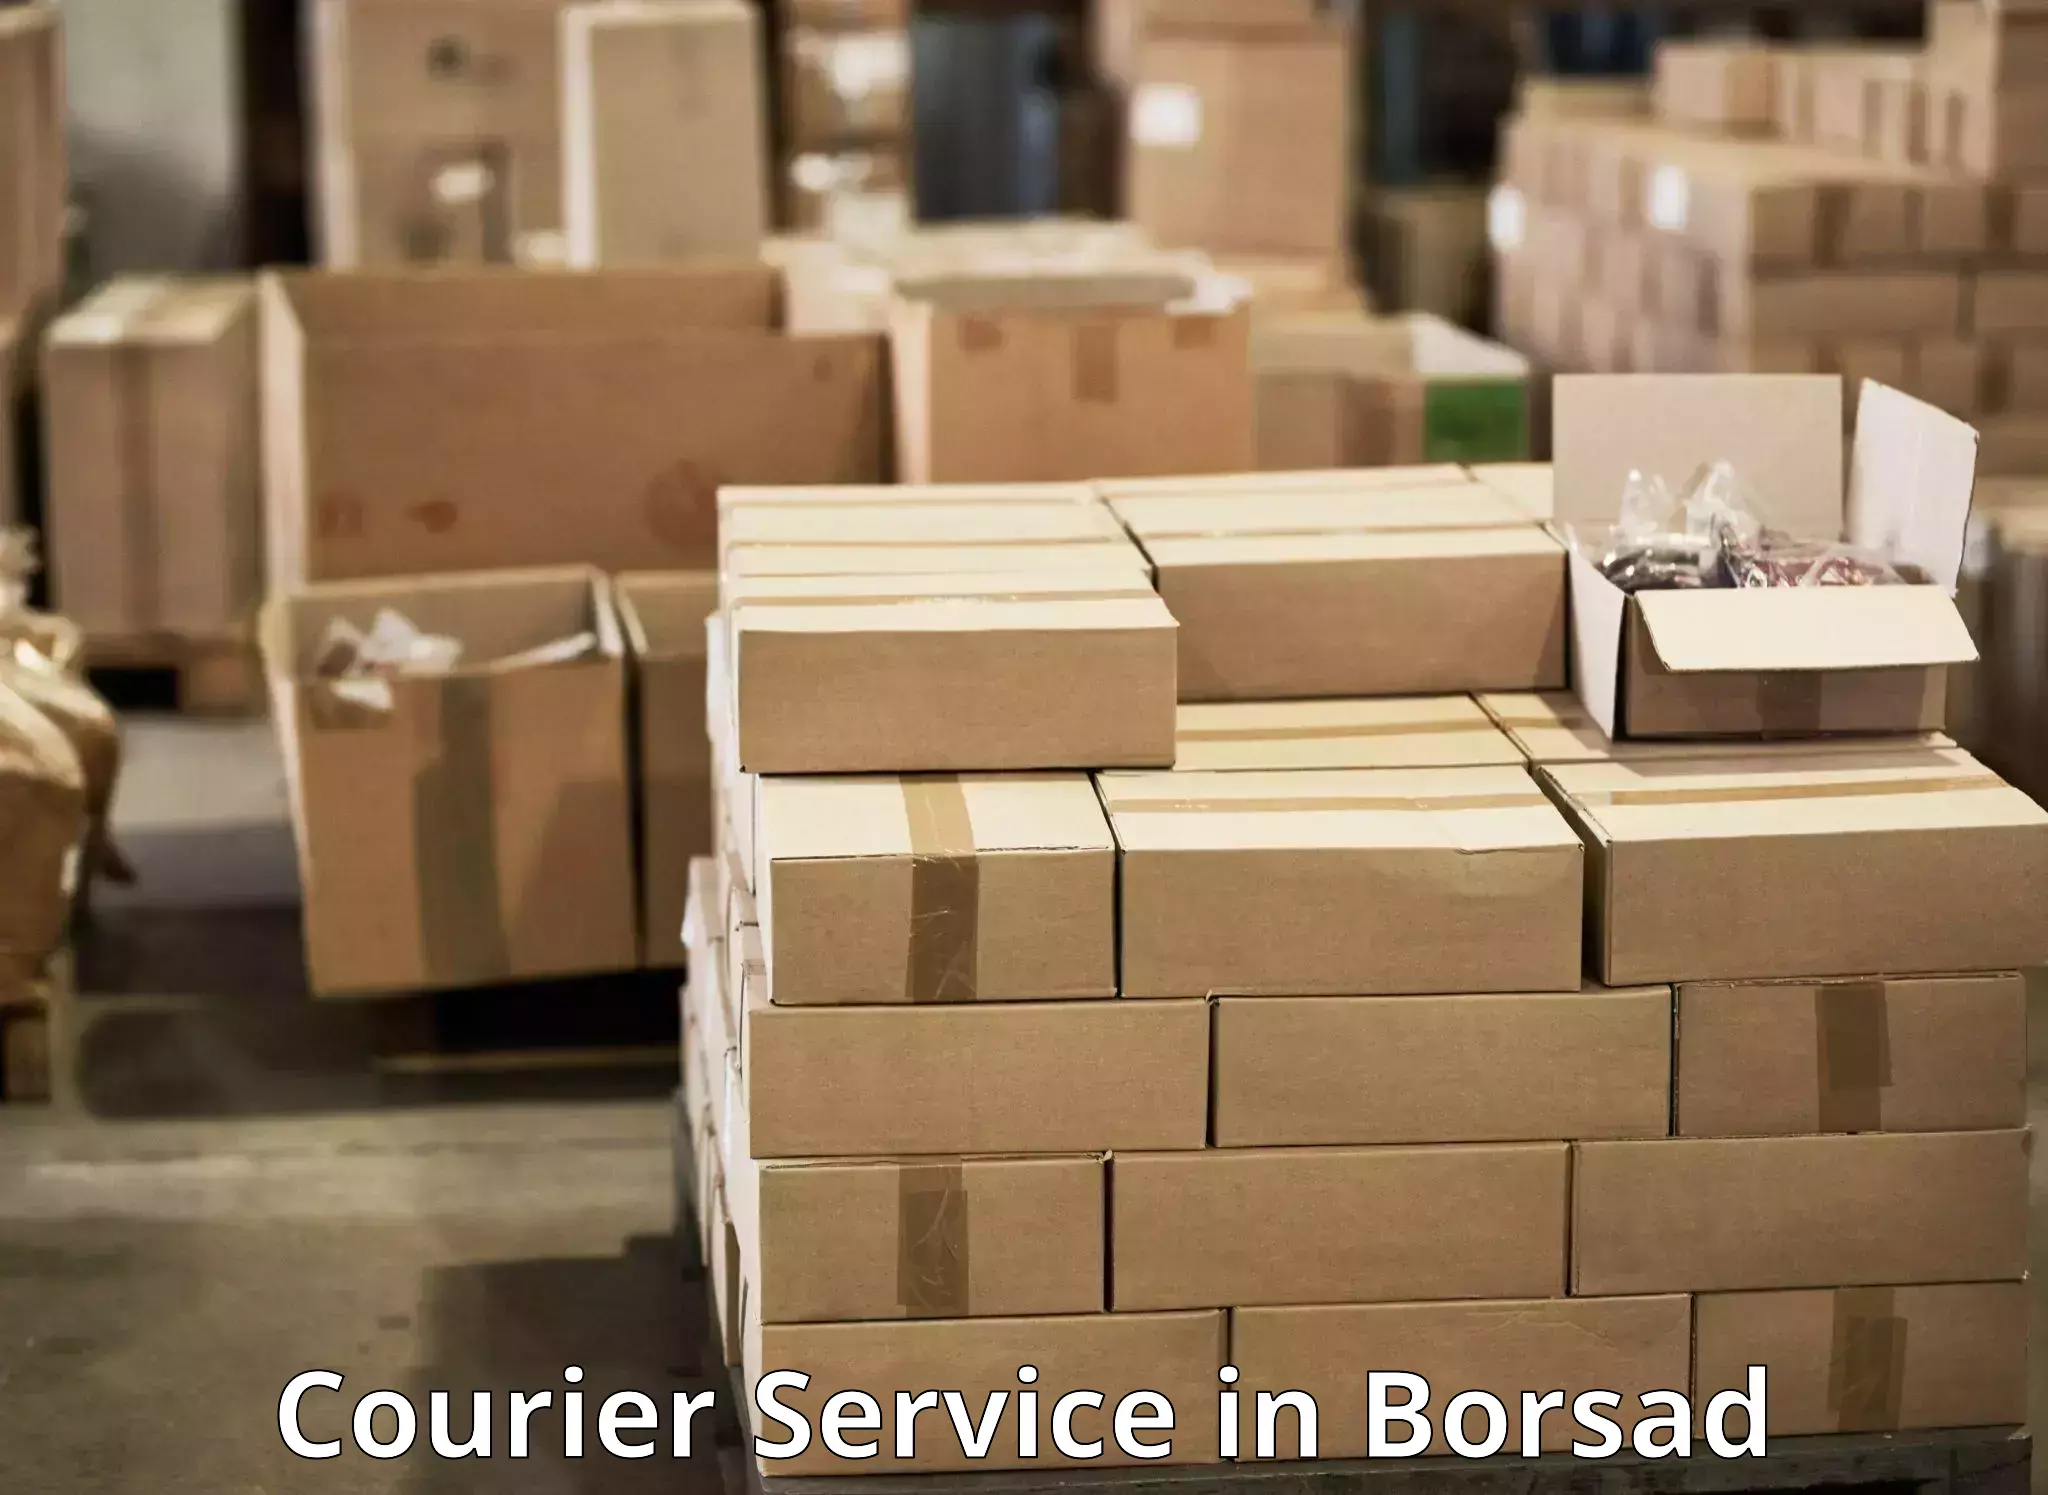 Advanced package delivery in Borsad